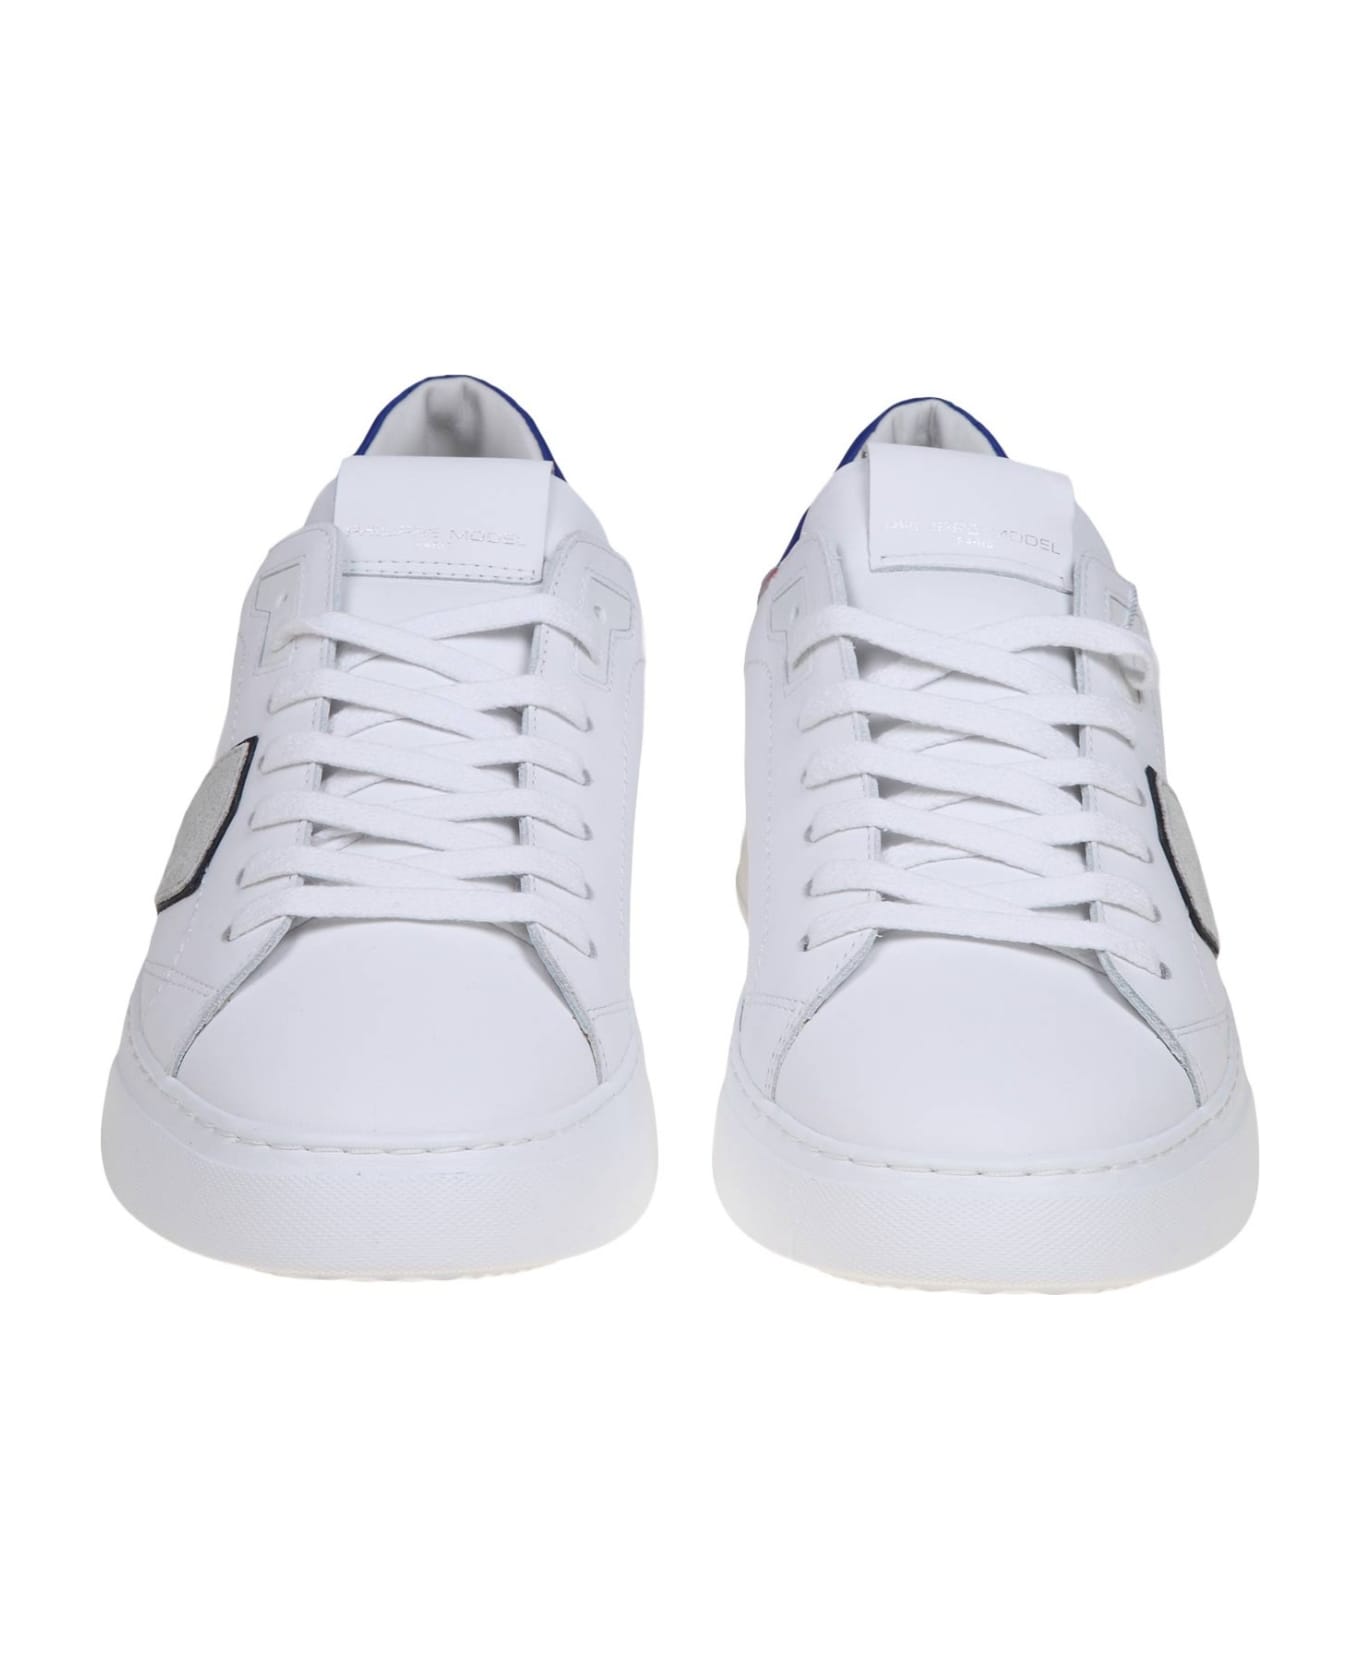 Philippe Model Temple Low Sneakers In White And Blue Leather - Blanc/bleu